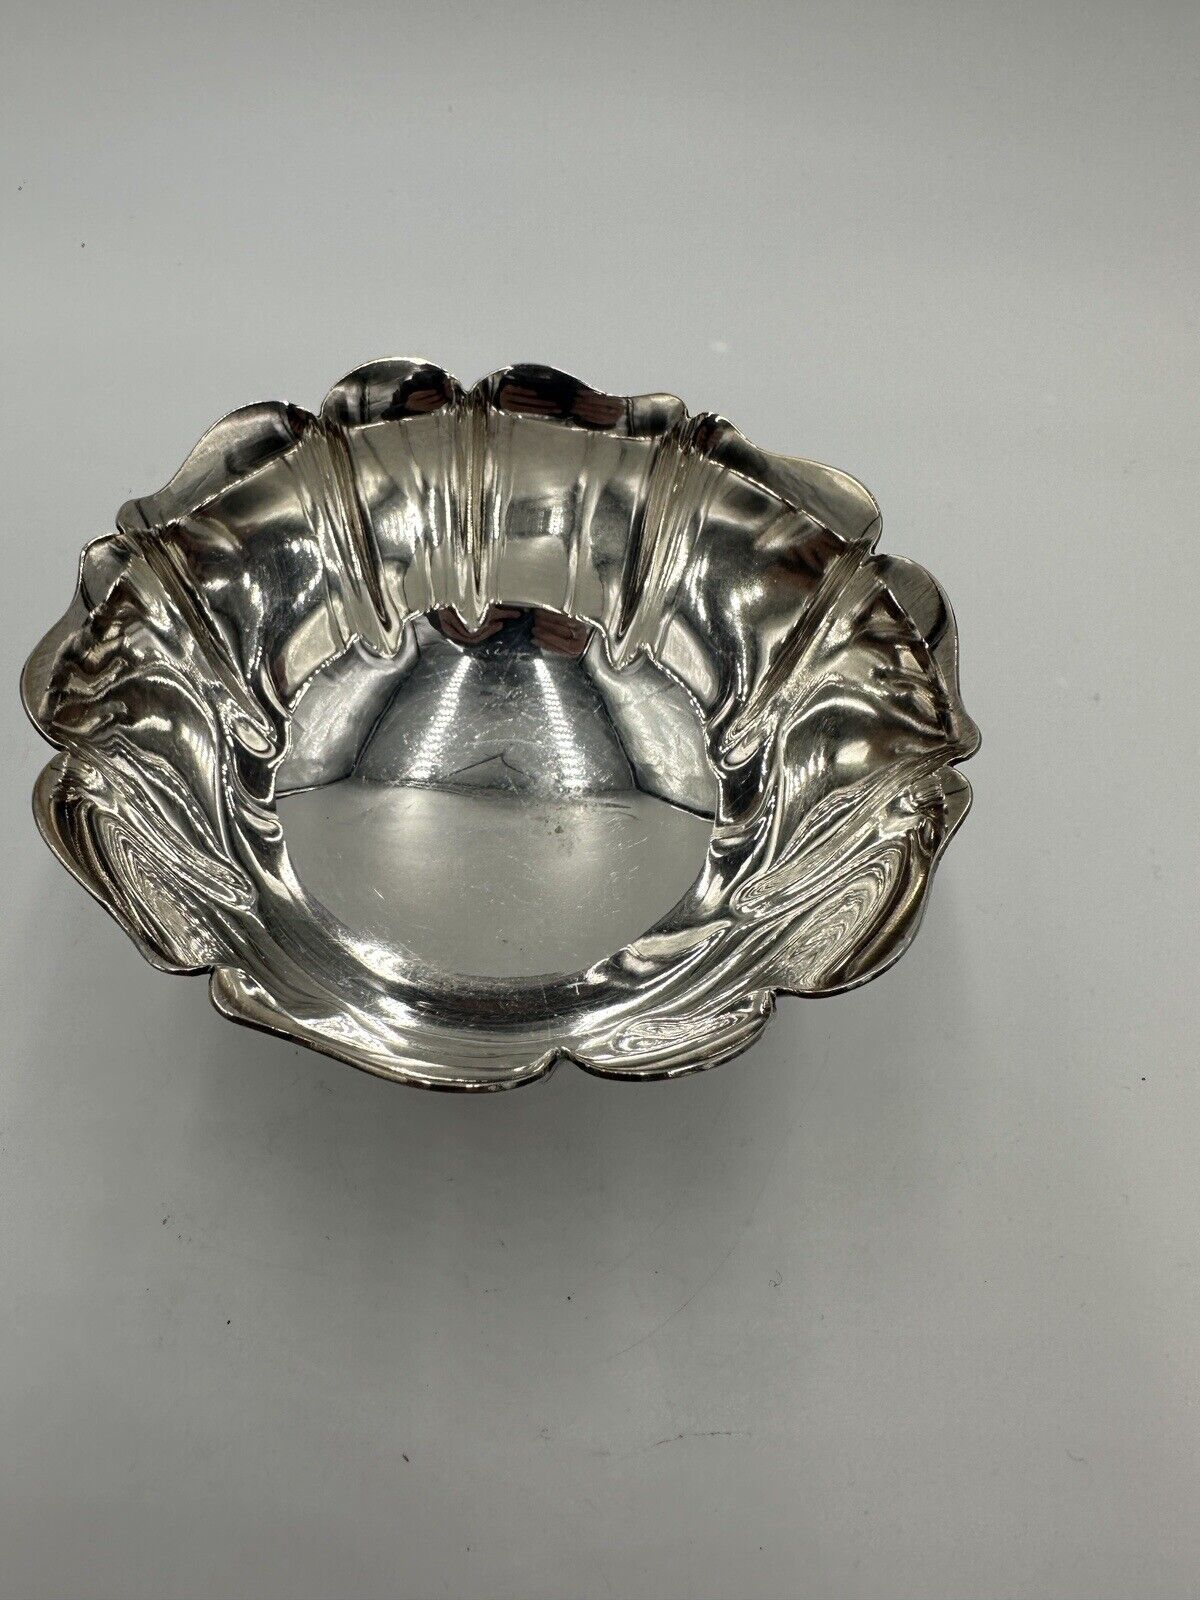 Antique Lawrence B Smith Lbs Co Silver plate Small Bowl 1897 Serveware Dining